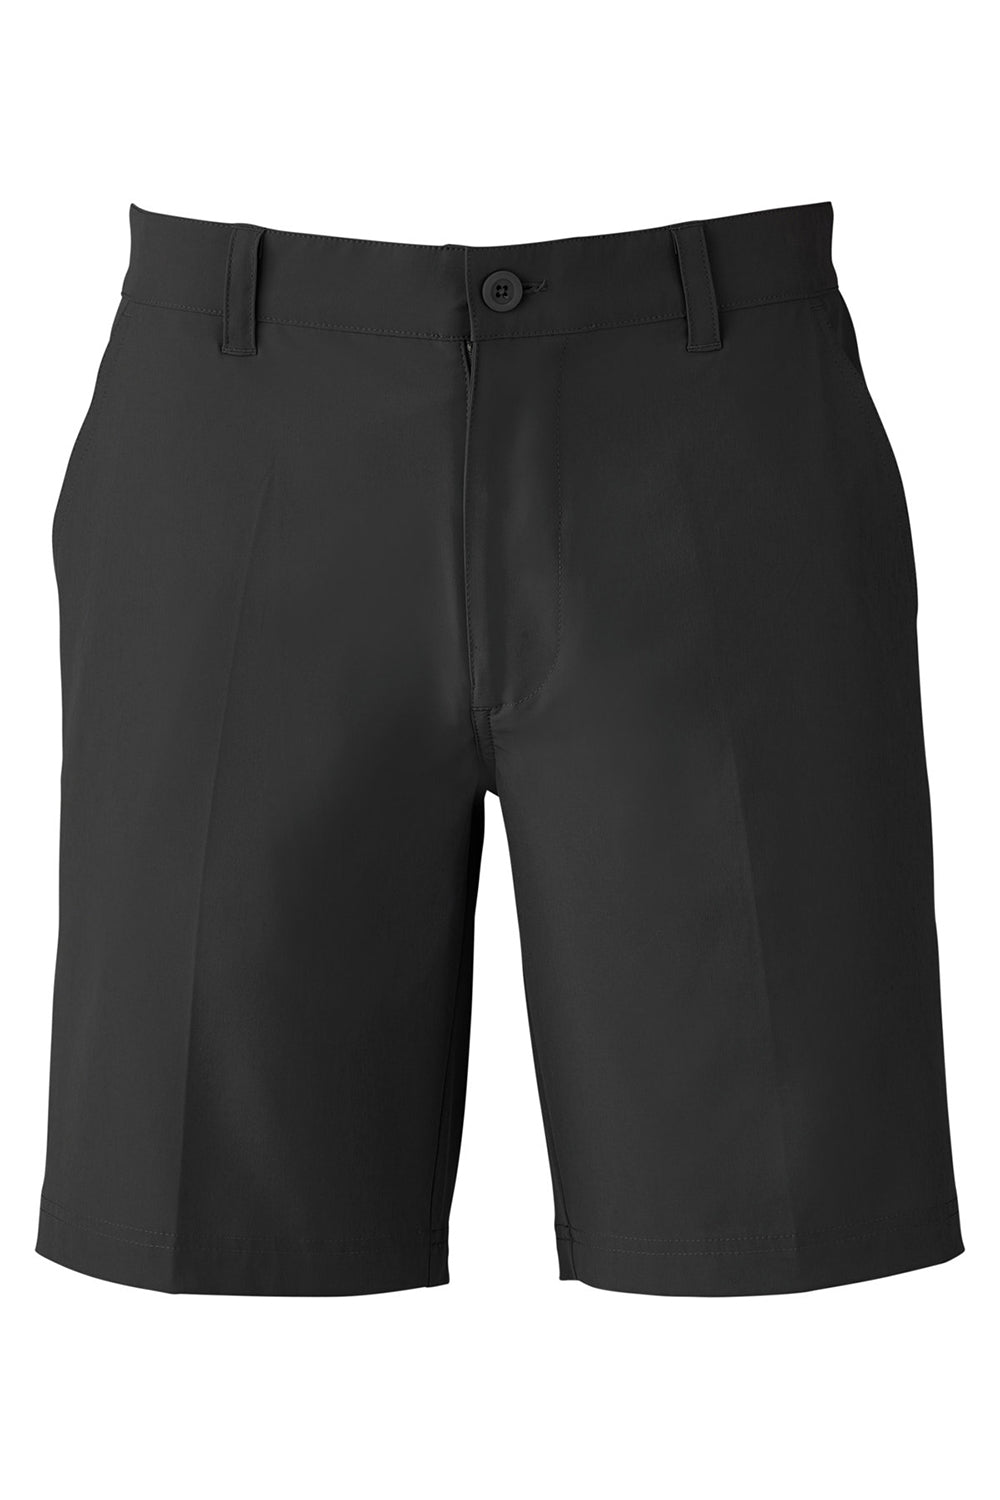 Swannies Golf SWS700 Mens Sully Shorts w/ Pockets Black Flat Front